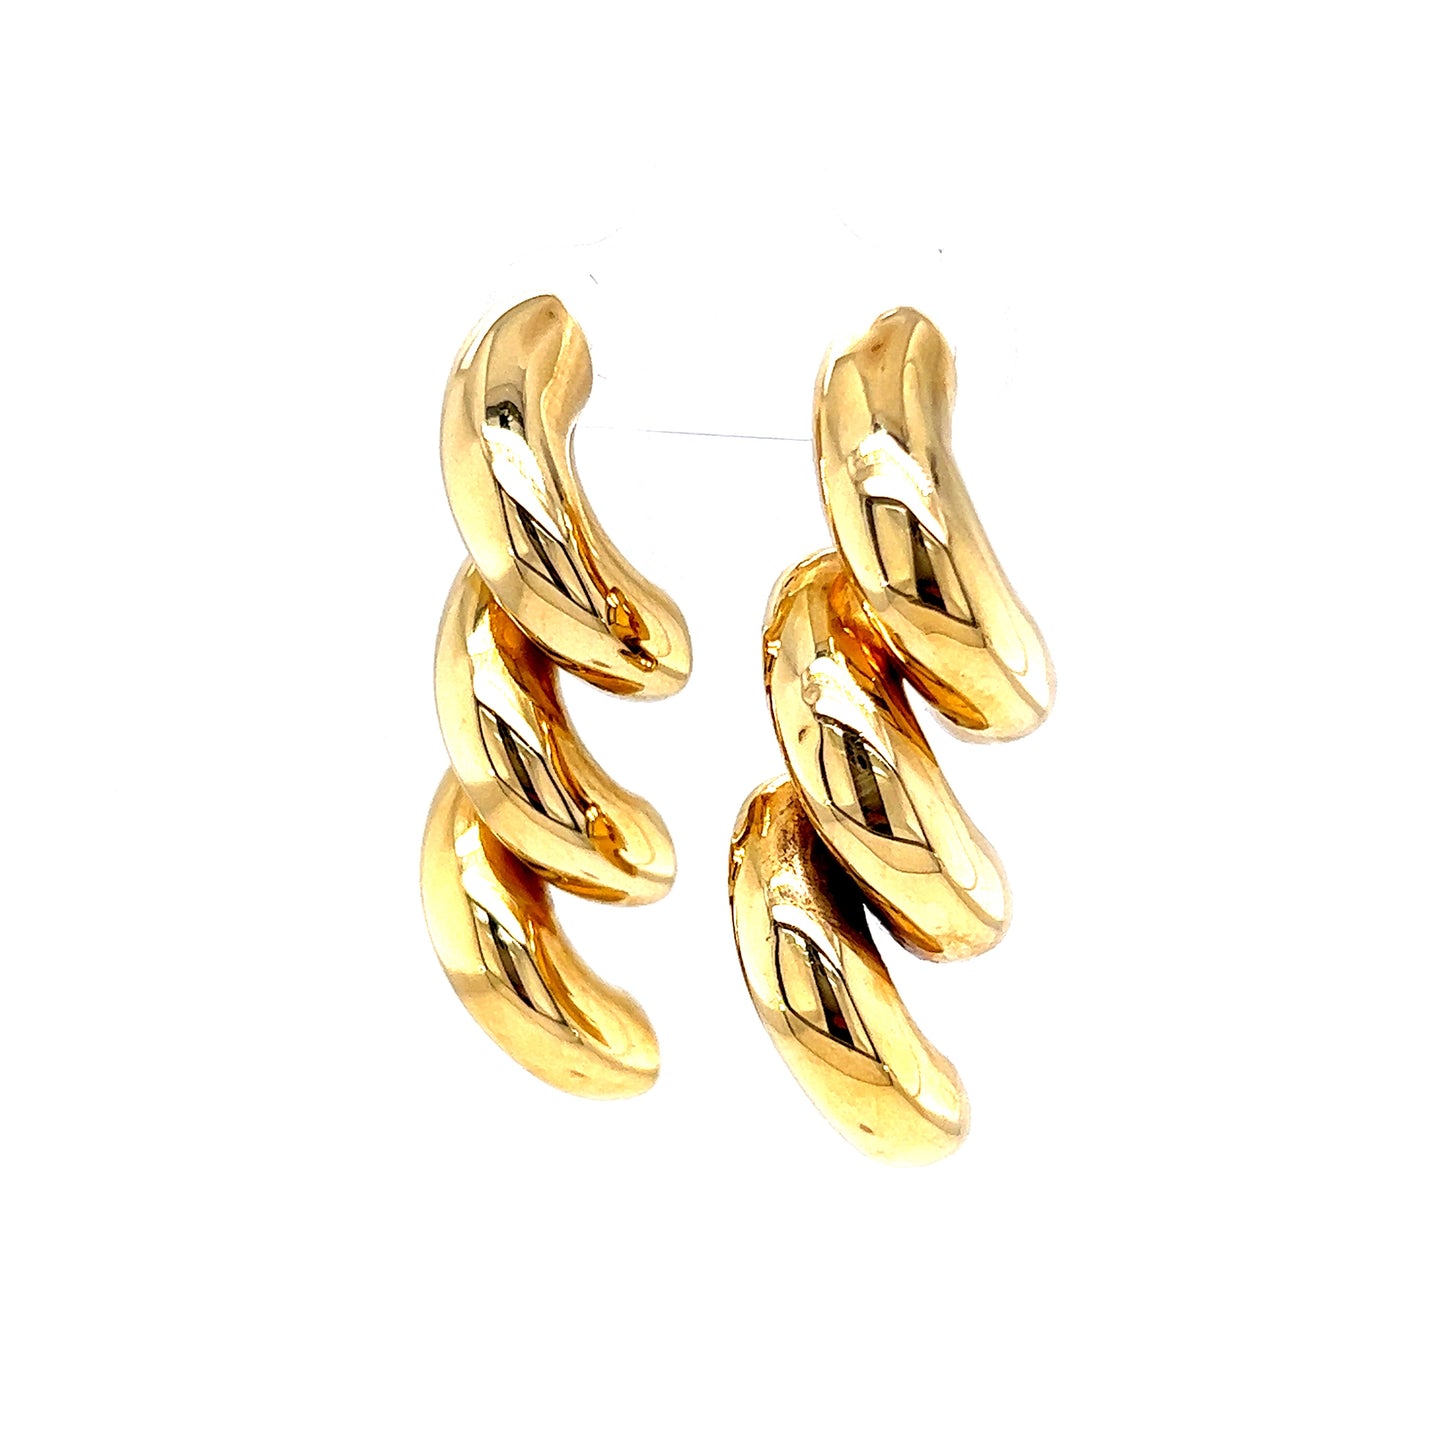 Chic Spiral Earrings in 14k Yellow Gold